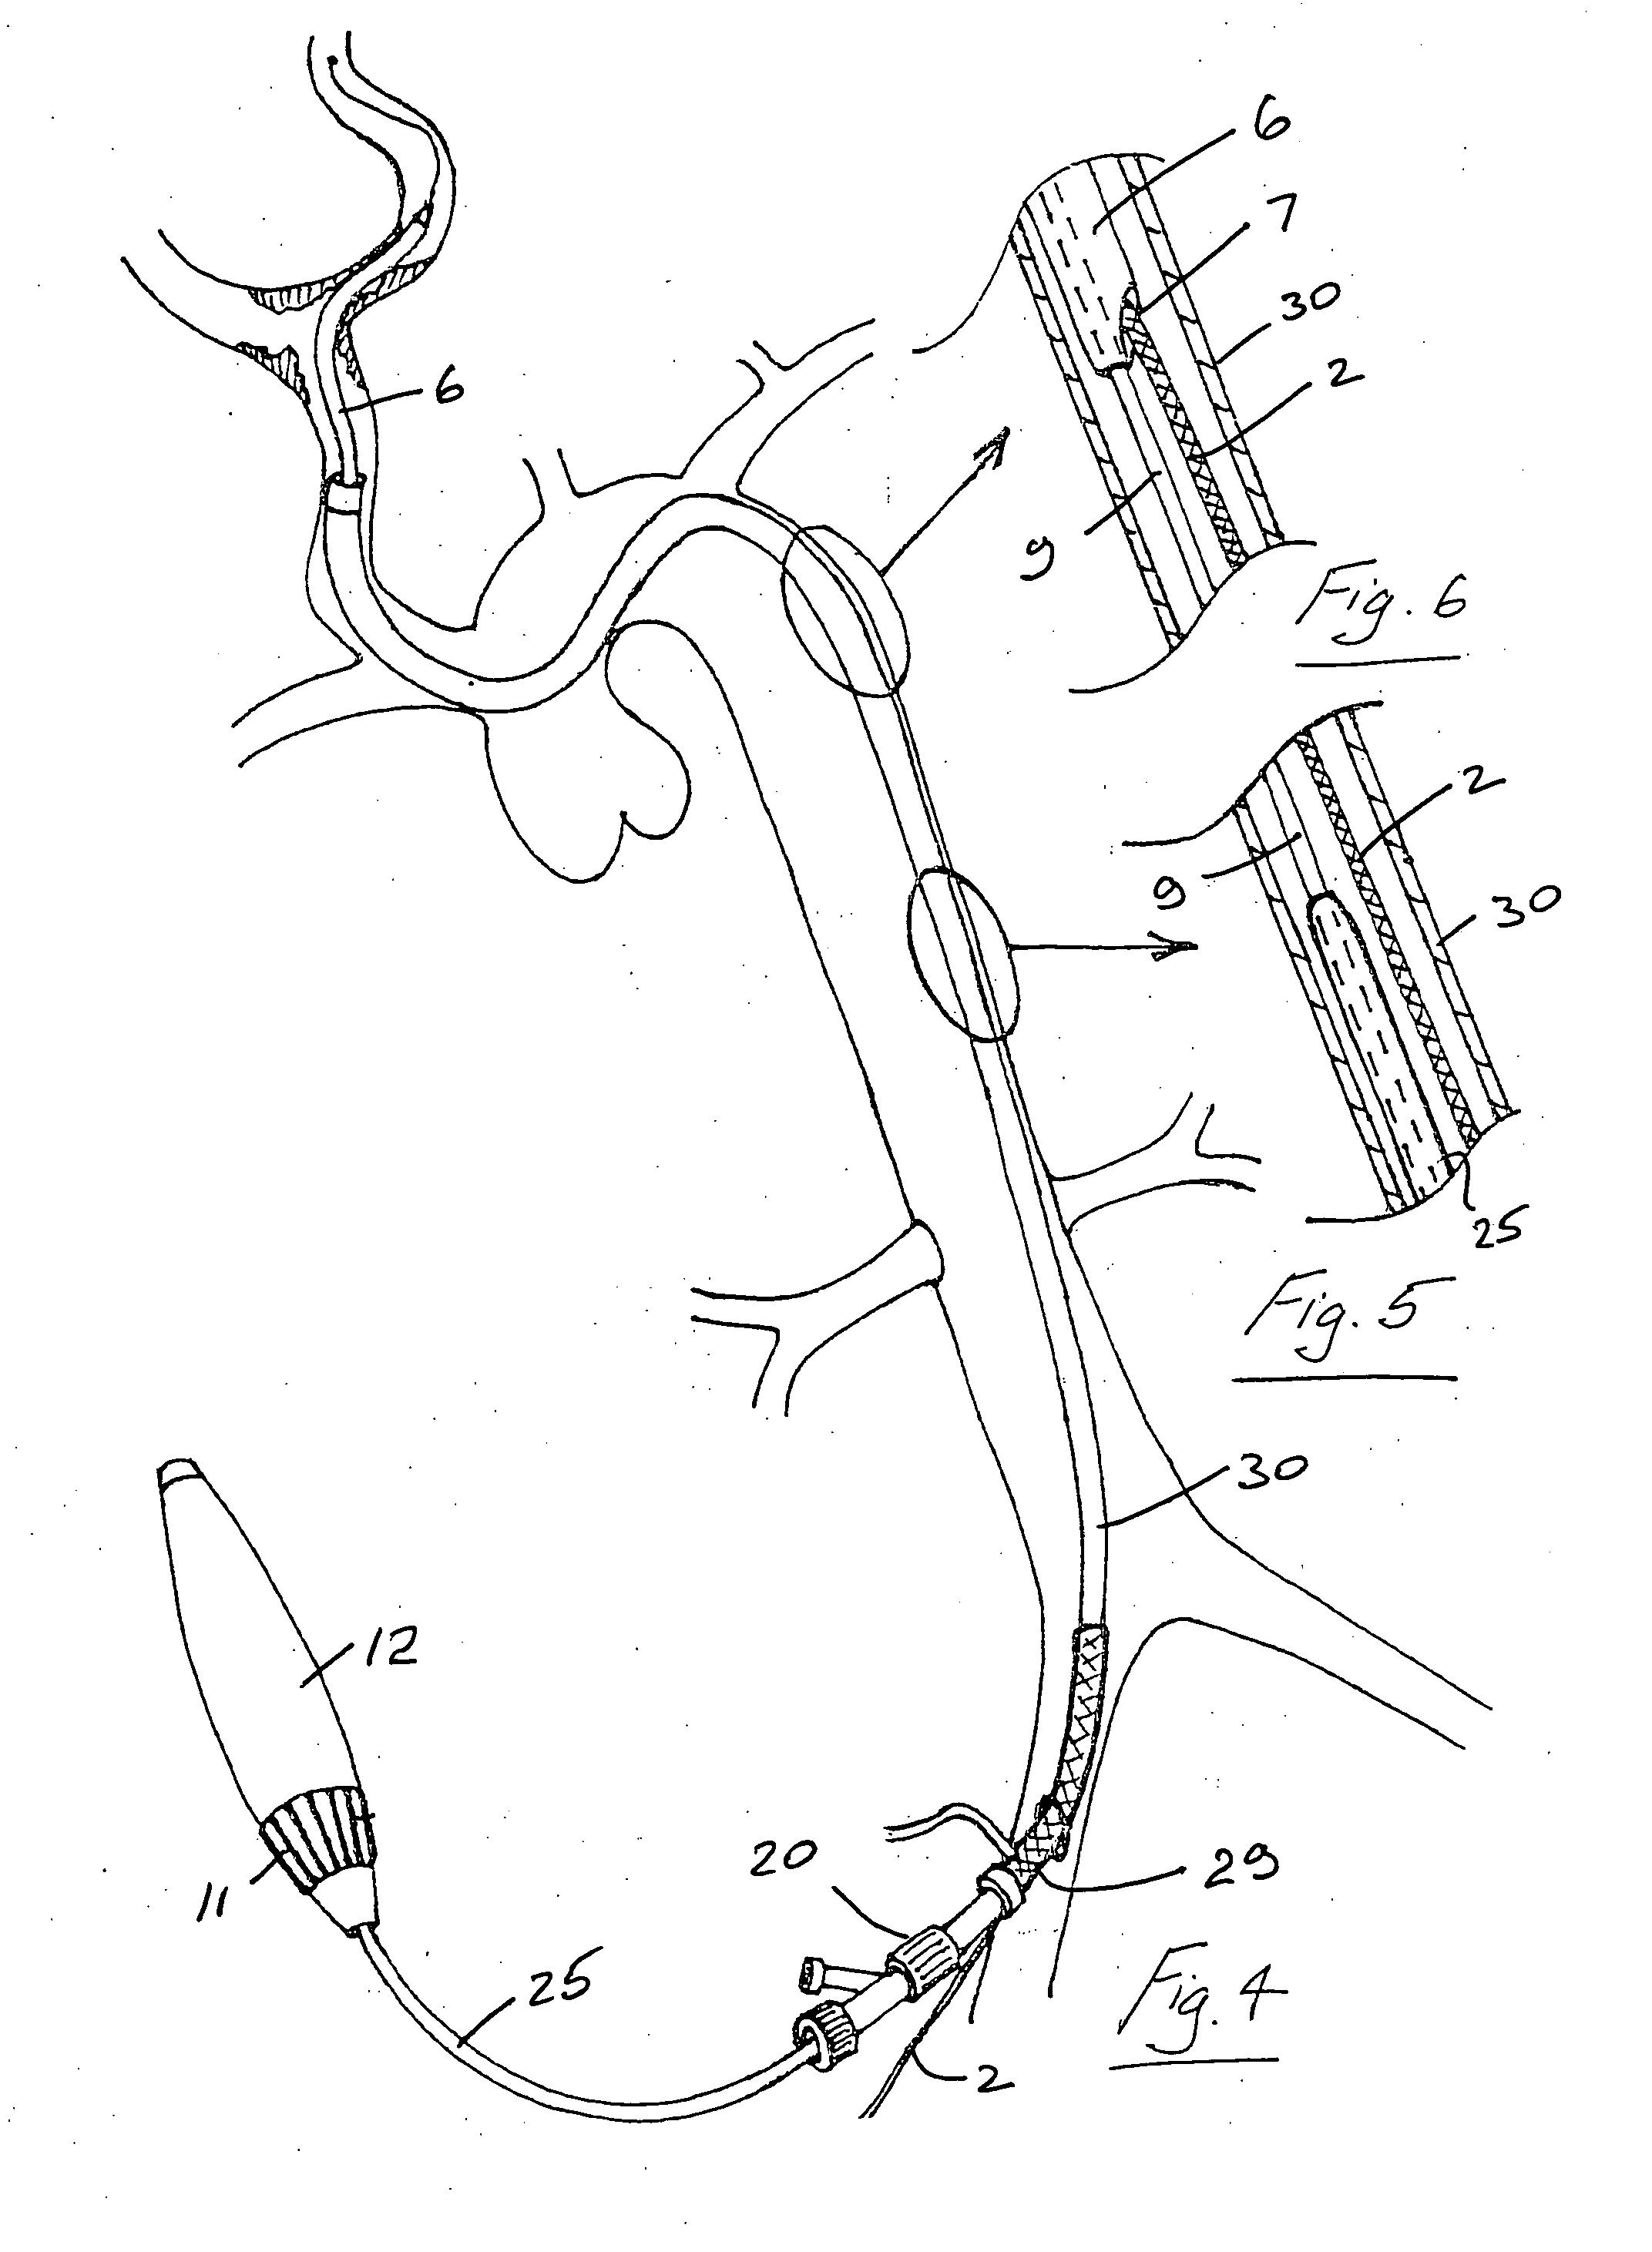 Stent delivery and deployment system